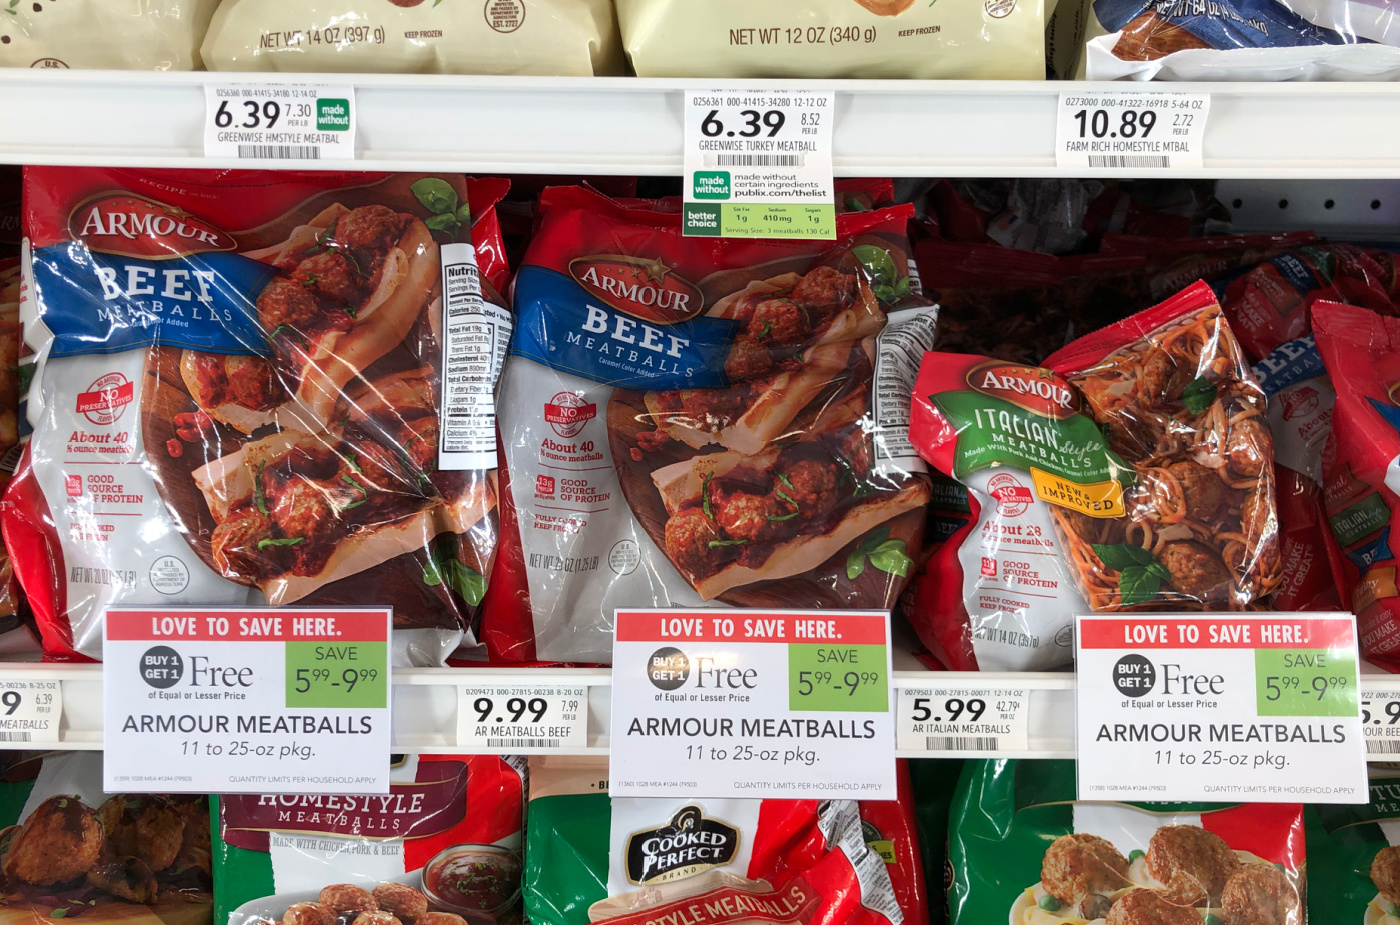 Armour Meatballs As Low As $2 At Publix - TODAY ONLY on I Heart Publix